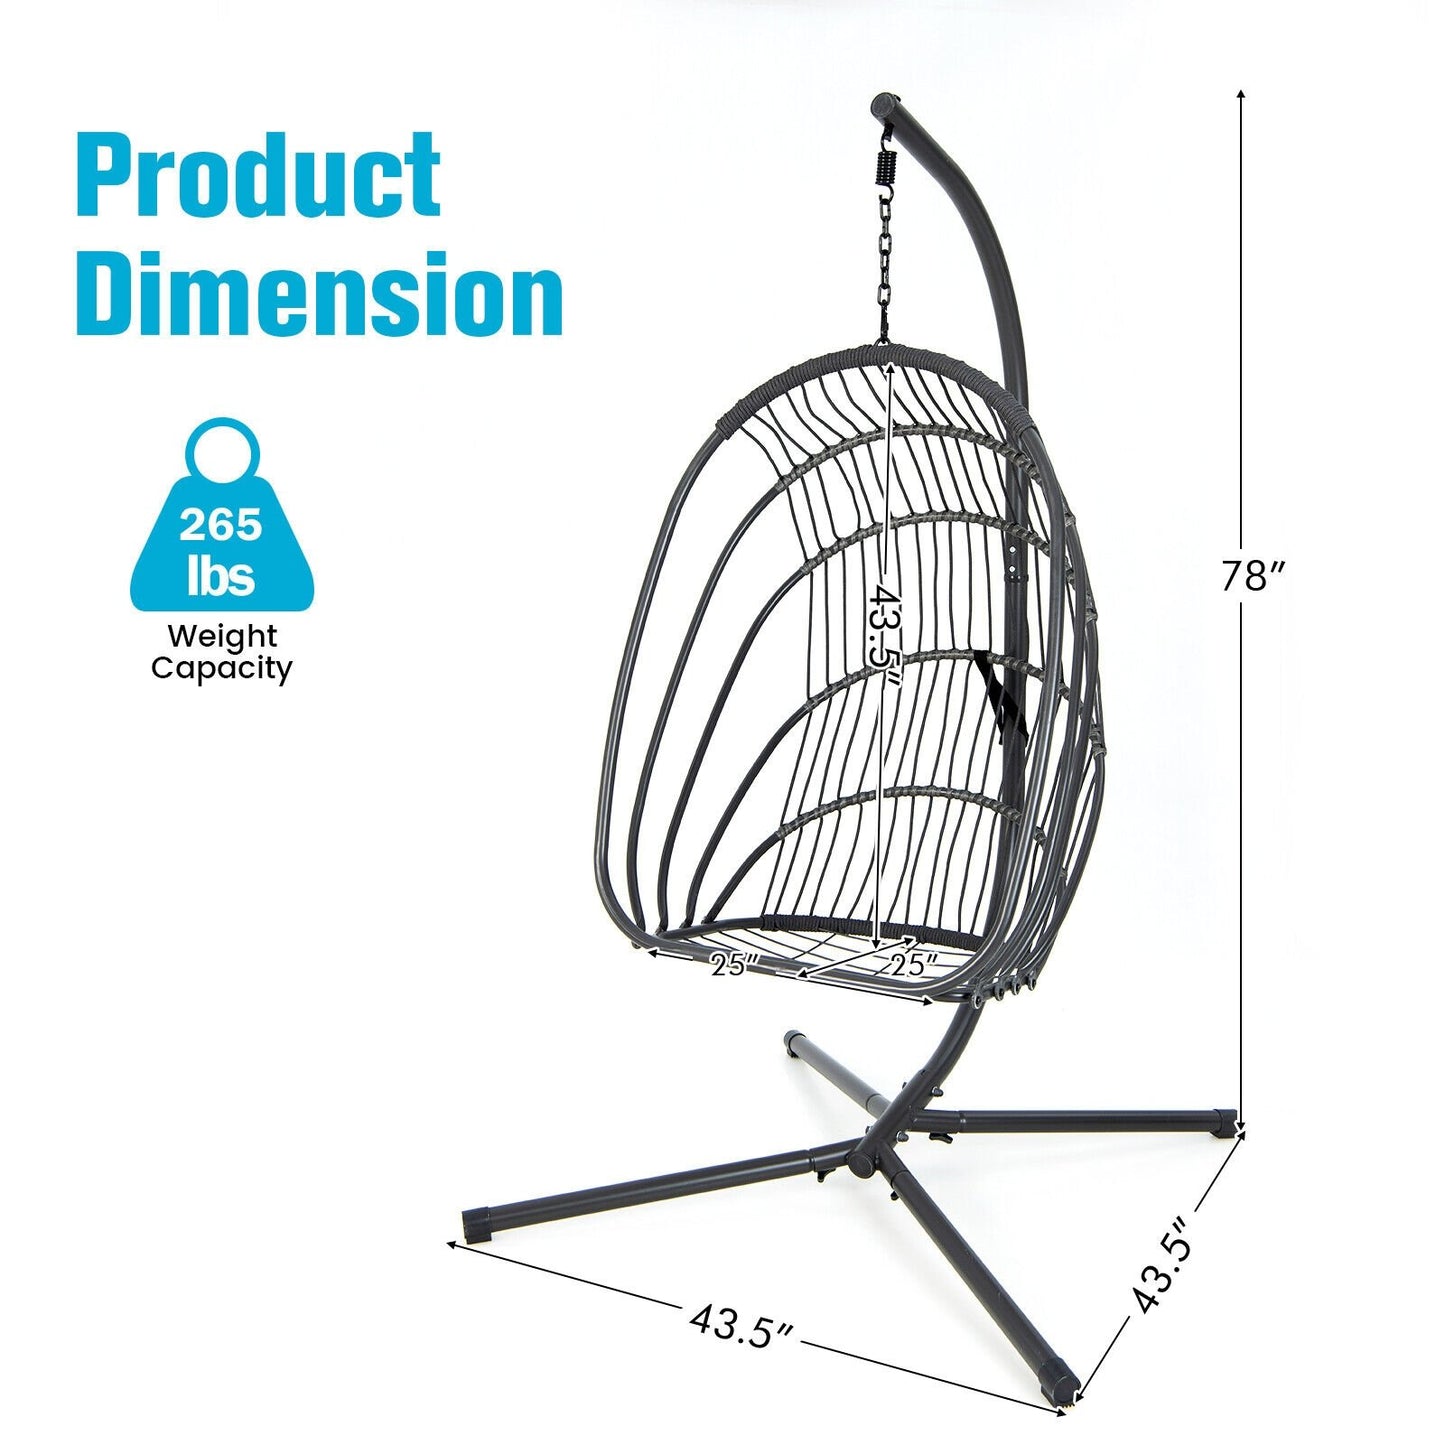 Hanging Folding Egg Chair with Stand Soft Cushion Pillow Swing Hammock, Turquoise